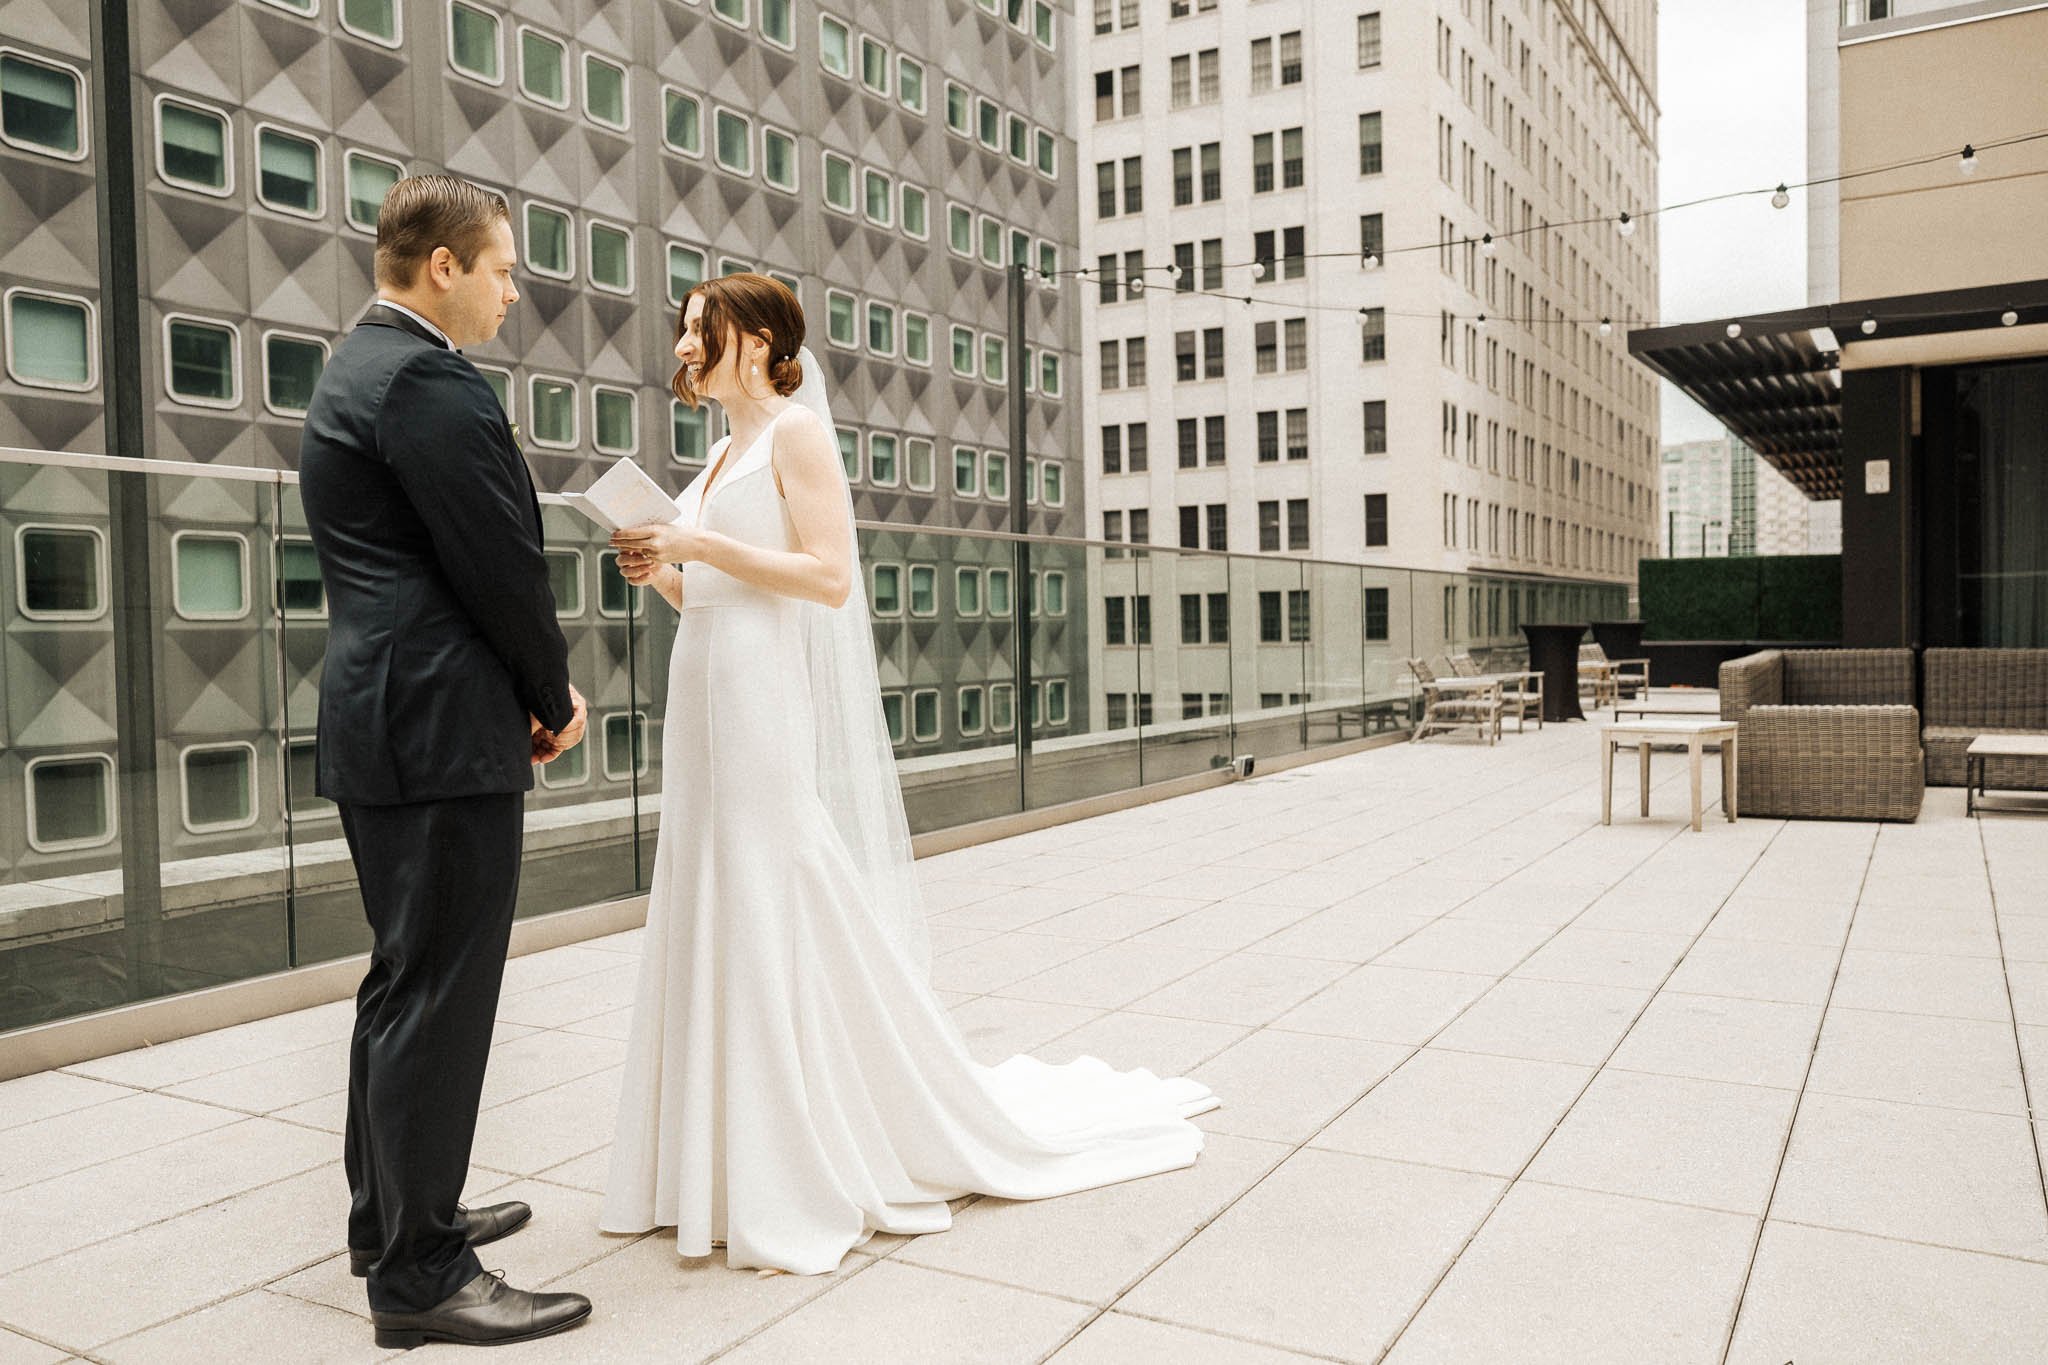  downtown pittsburgh wedding vows 